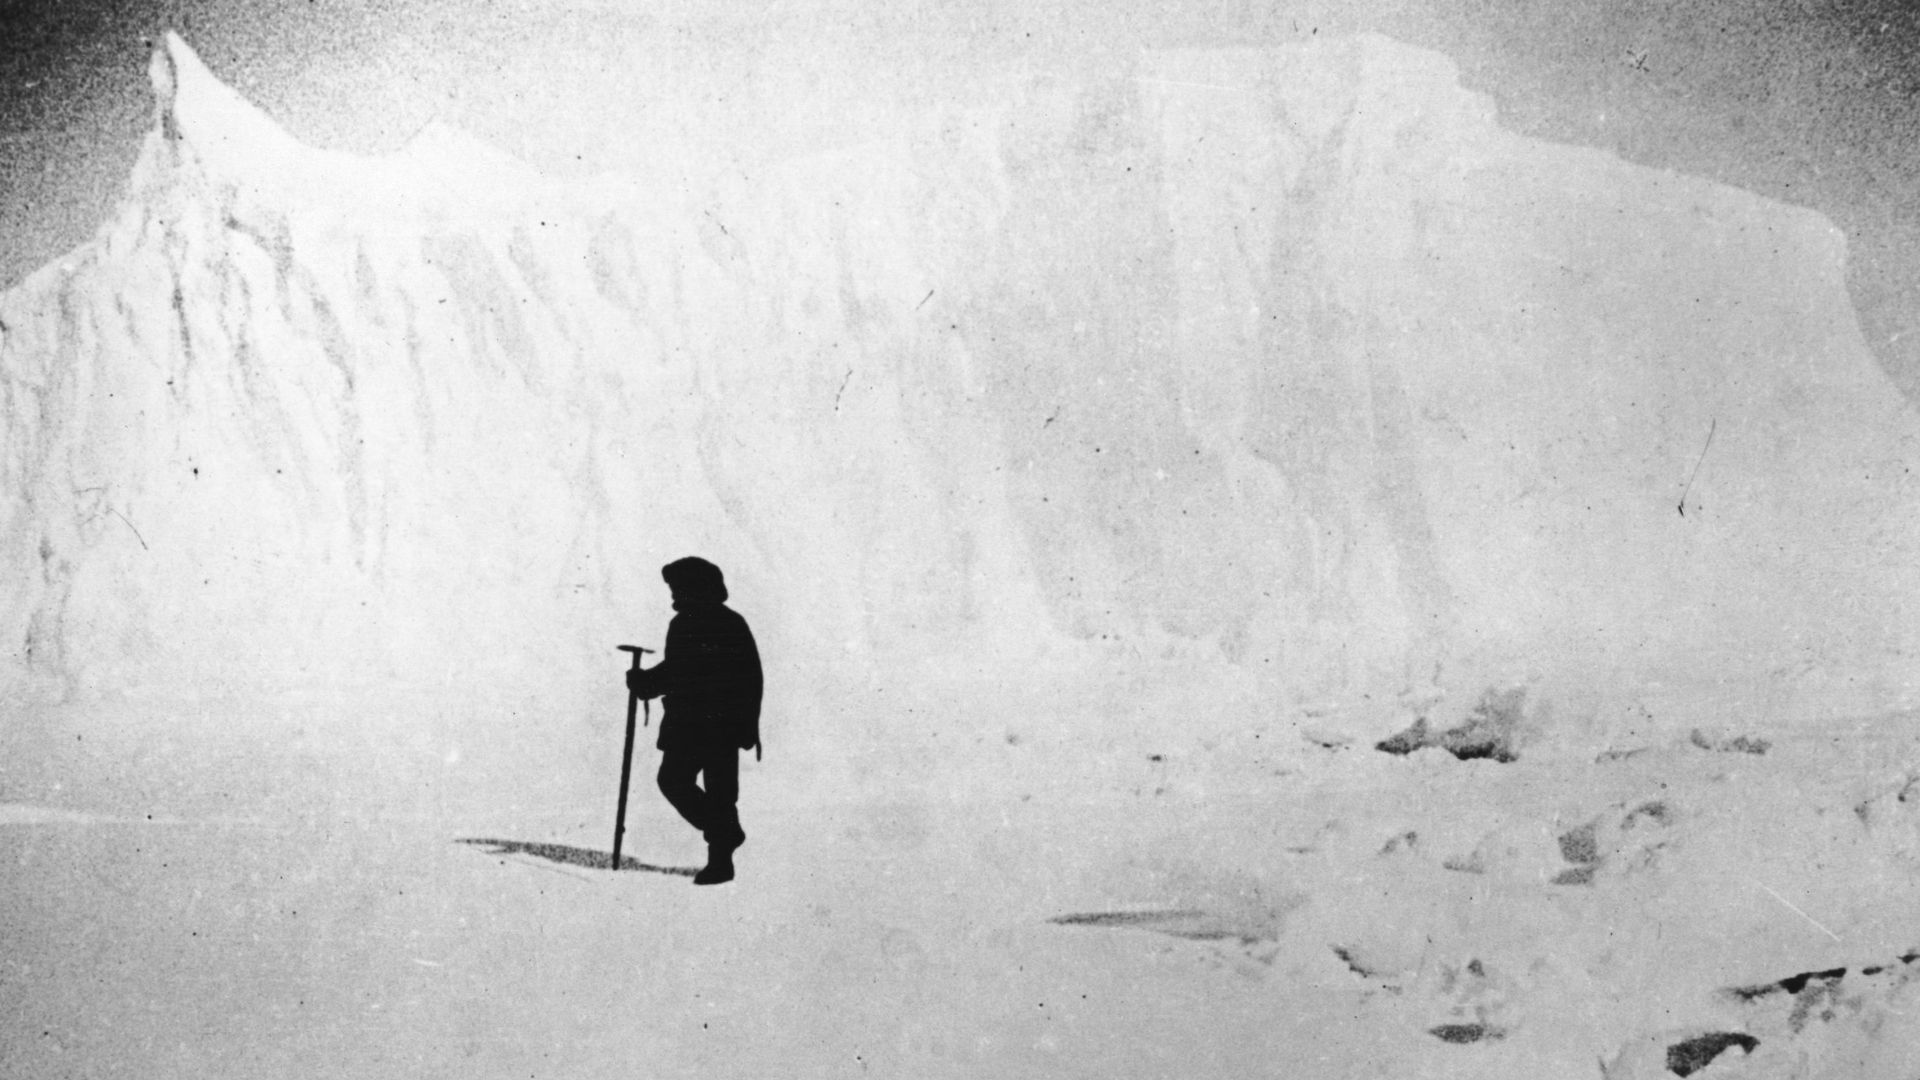 1911: Norwegian explorer Captain Roald Amundsen, the first man to reach the South Pole, inspecting ice fields near a glacier in the Atlantic Ocean.